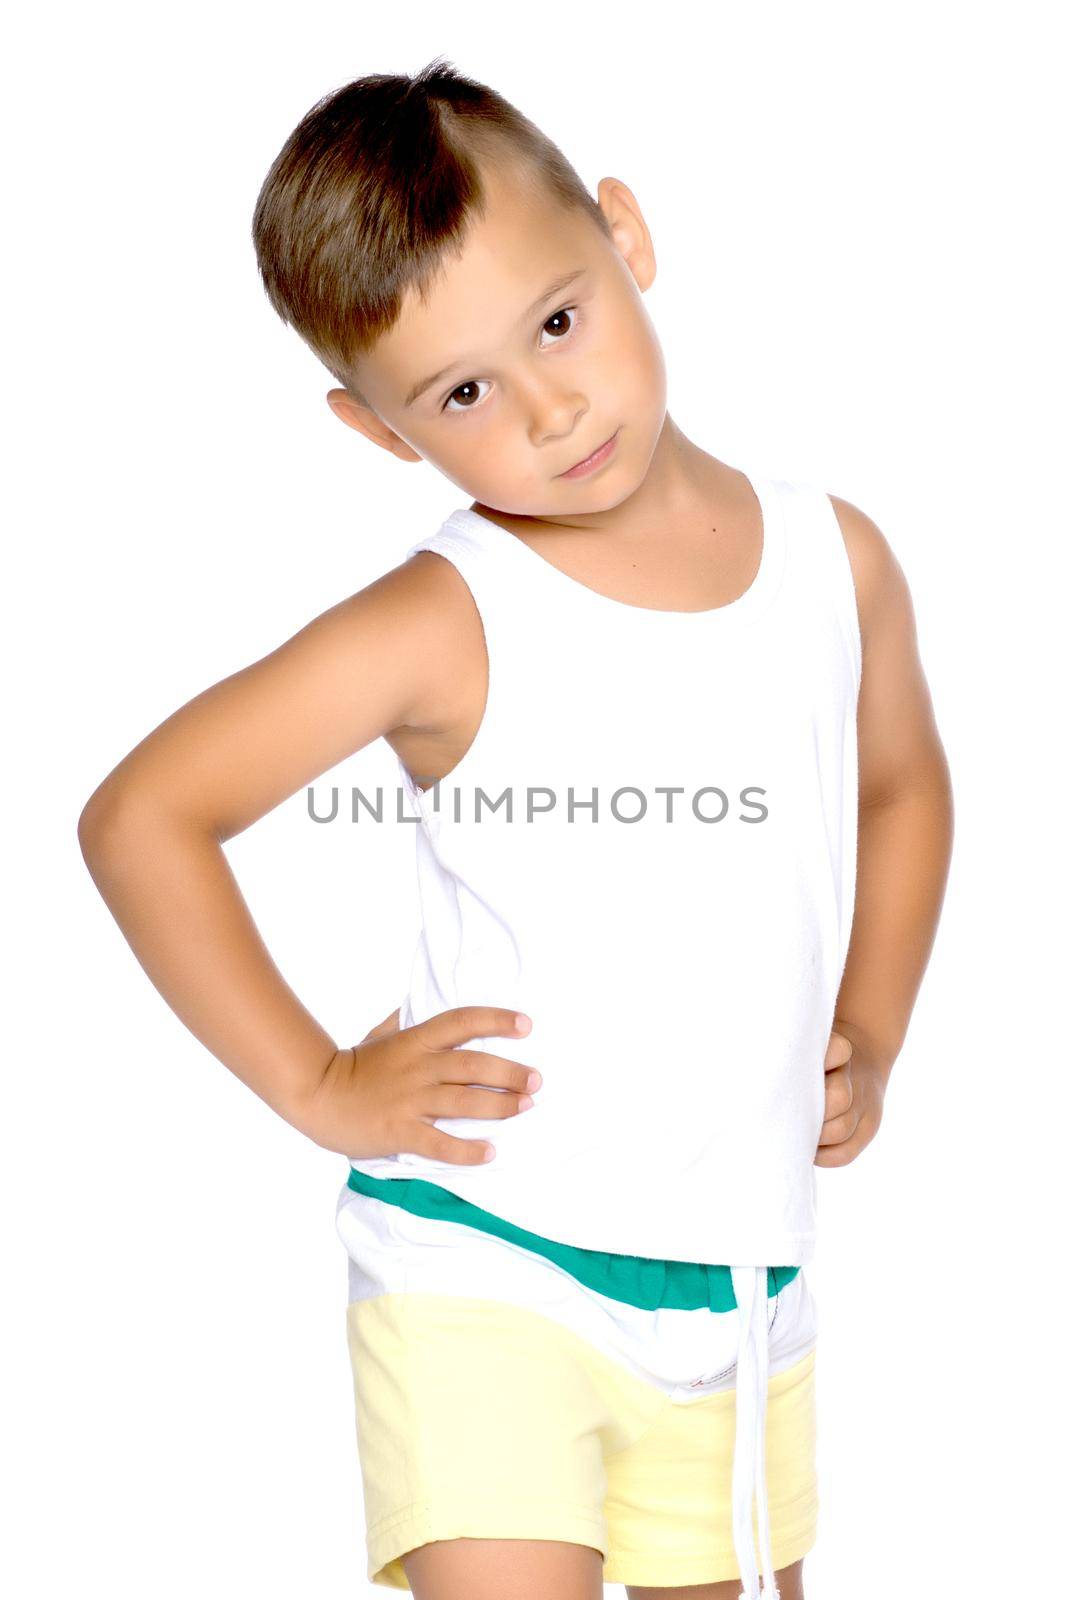 A cute little boy in a white T-shirt. The concept of promotional goods, inscriptions and drawings on clothes. Isolated on white background.